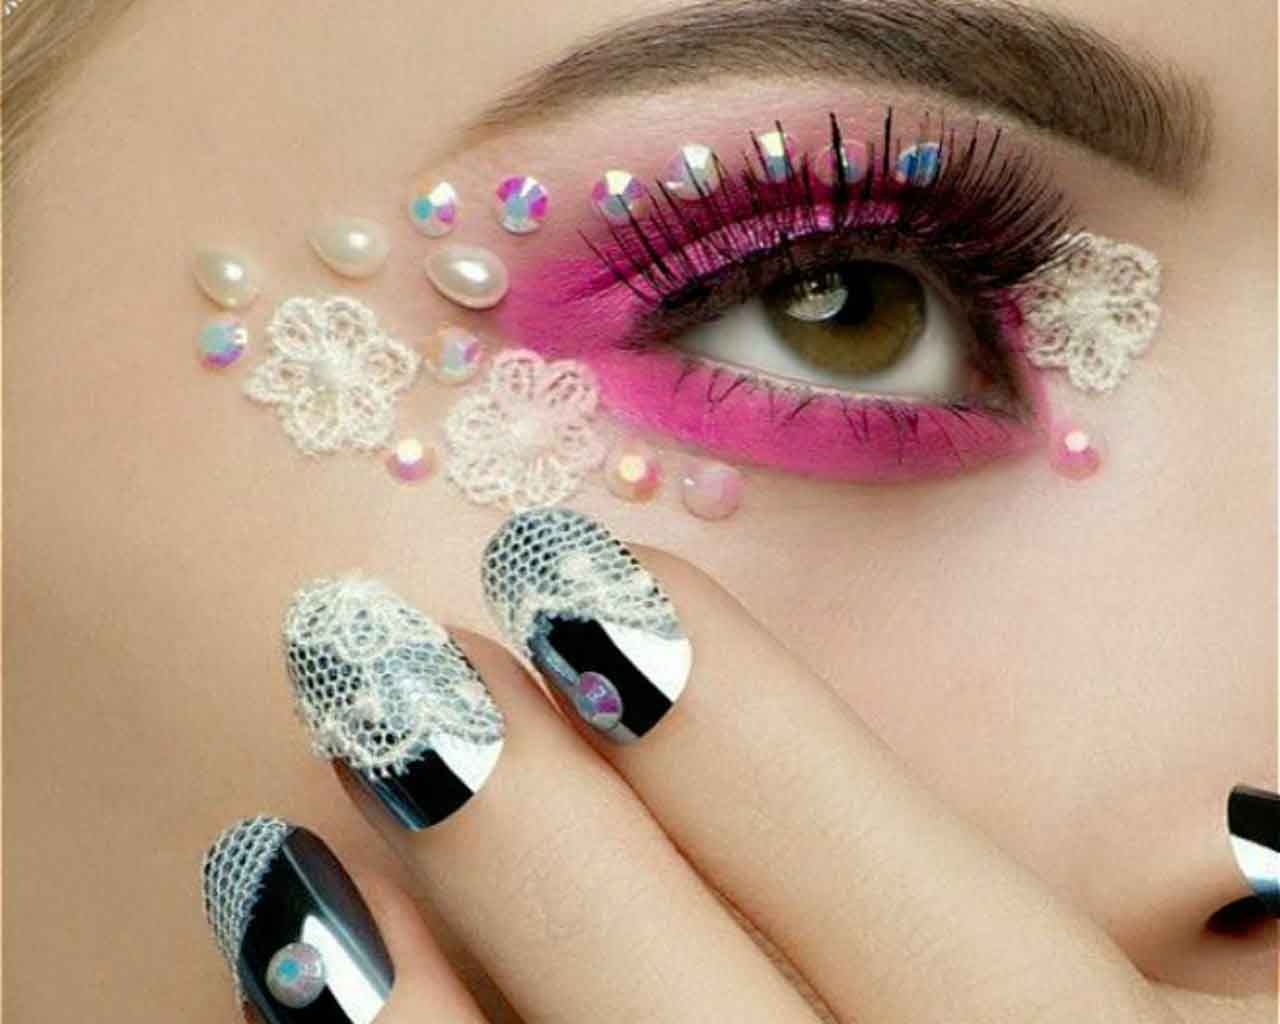 5. Stunning HD Nail Art Images - wide 6